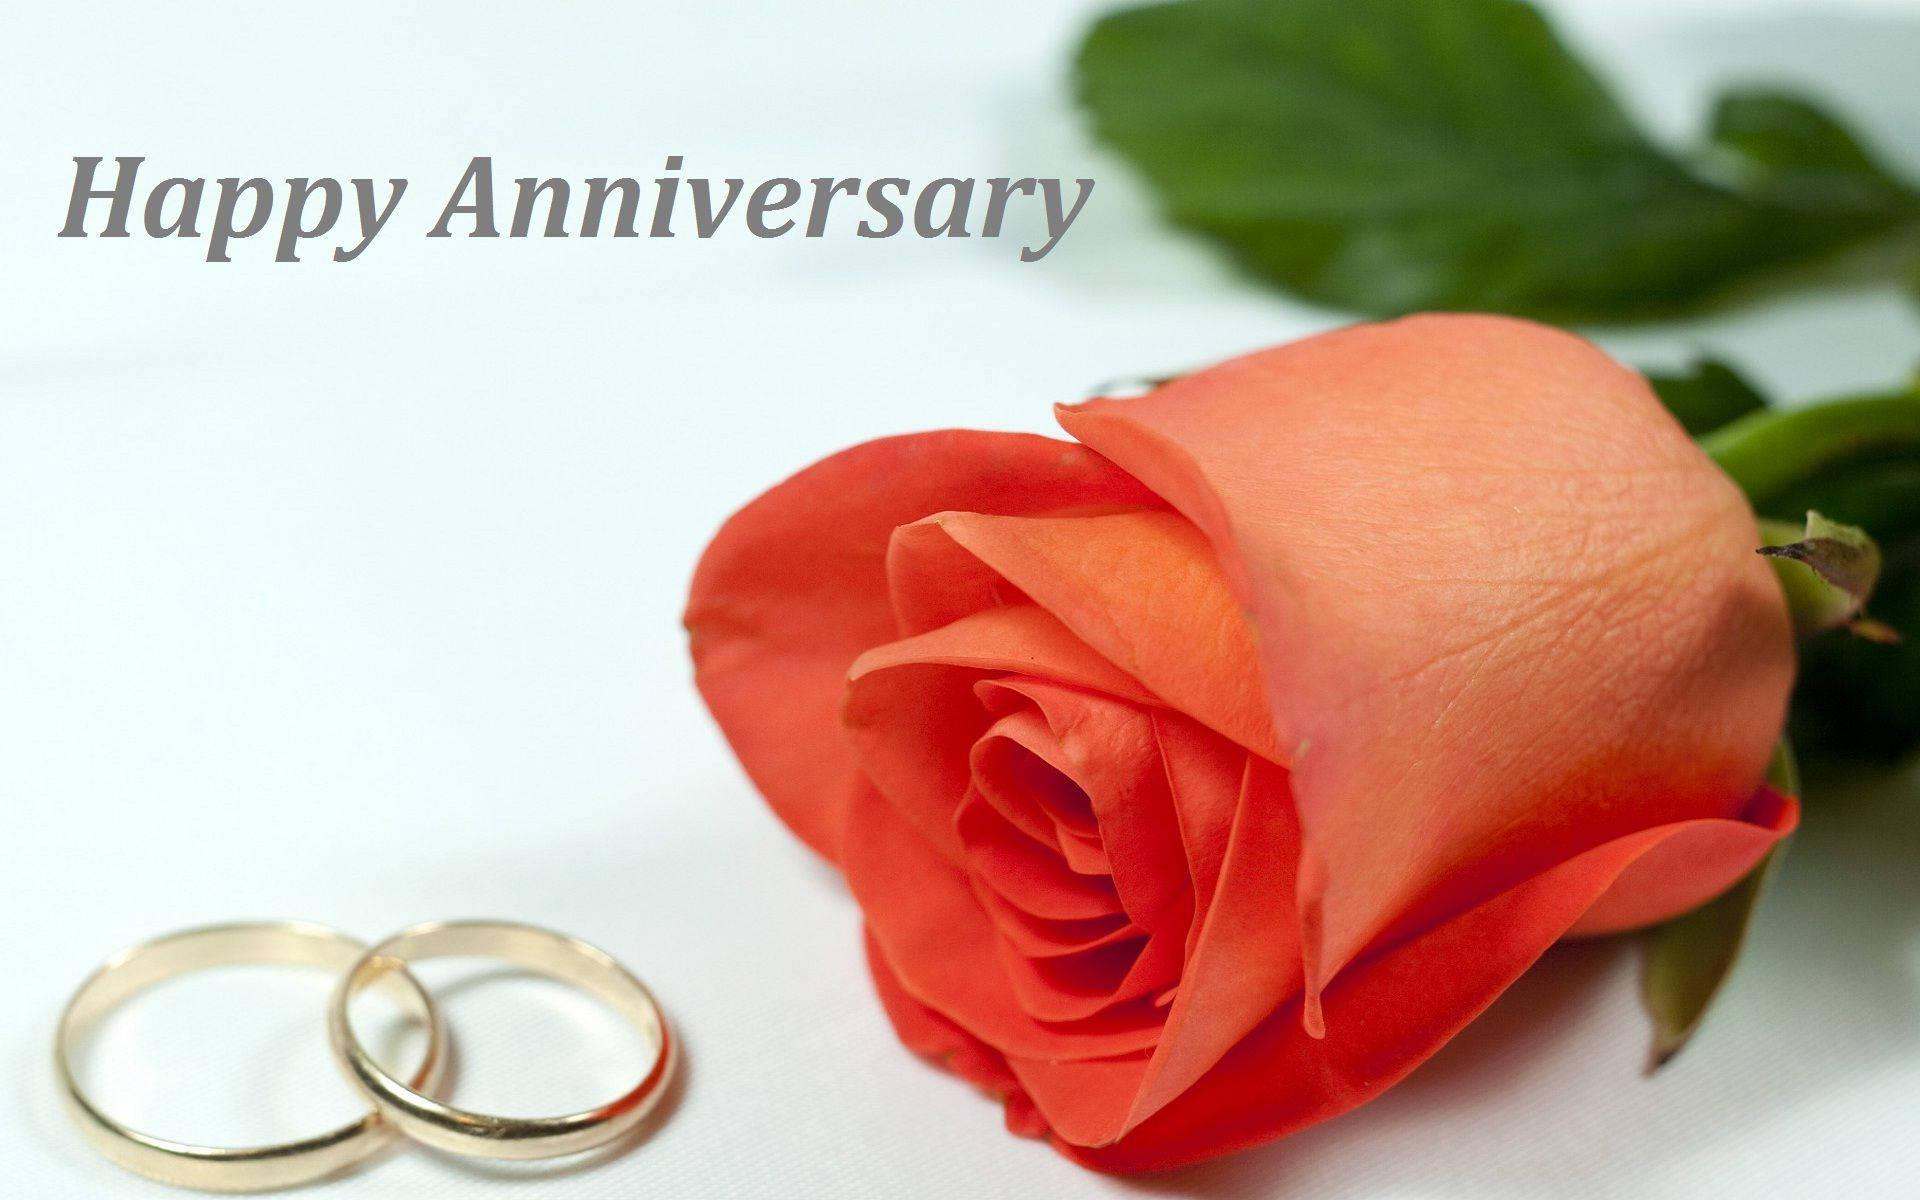 Happy Anniversary With Rings And Rose